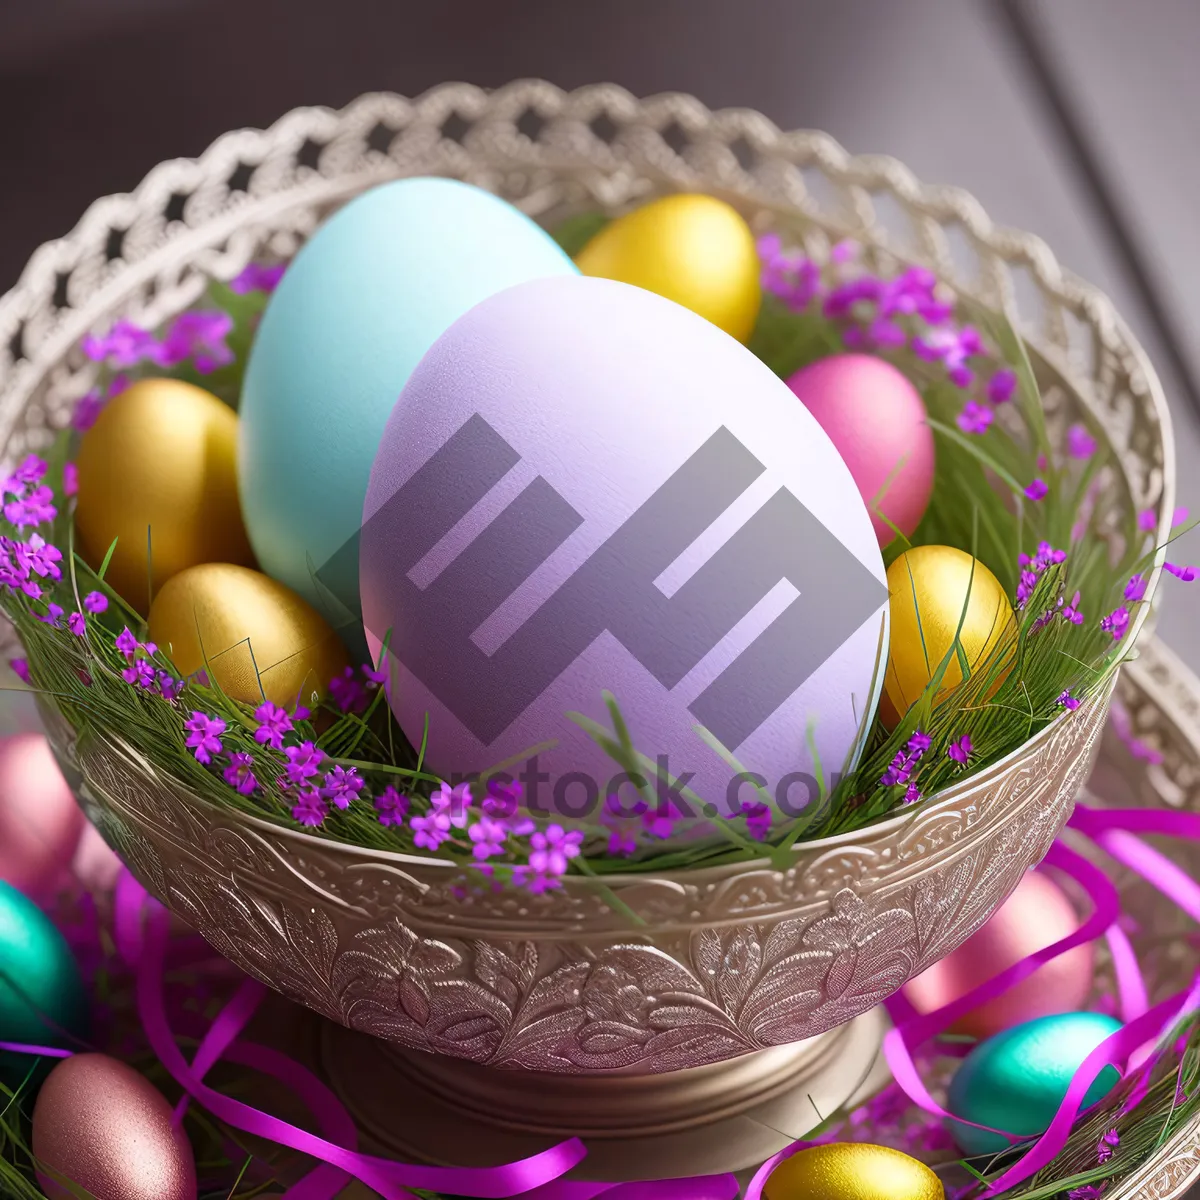 Picture of Colorful Easter Eggs in a Festive Basket